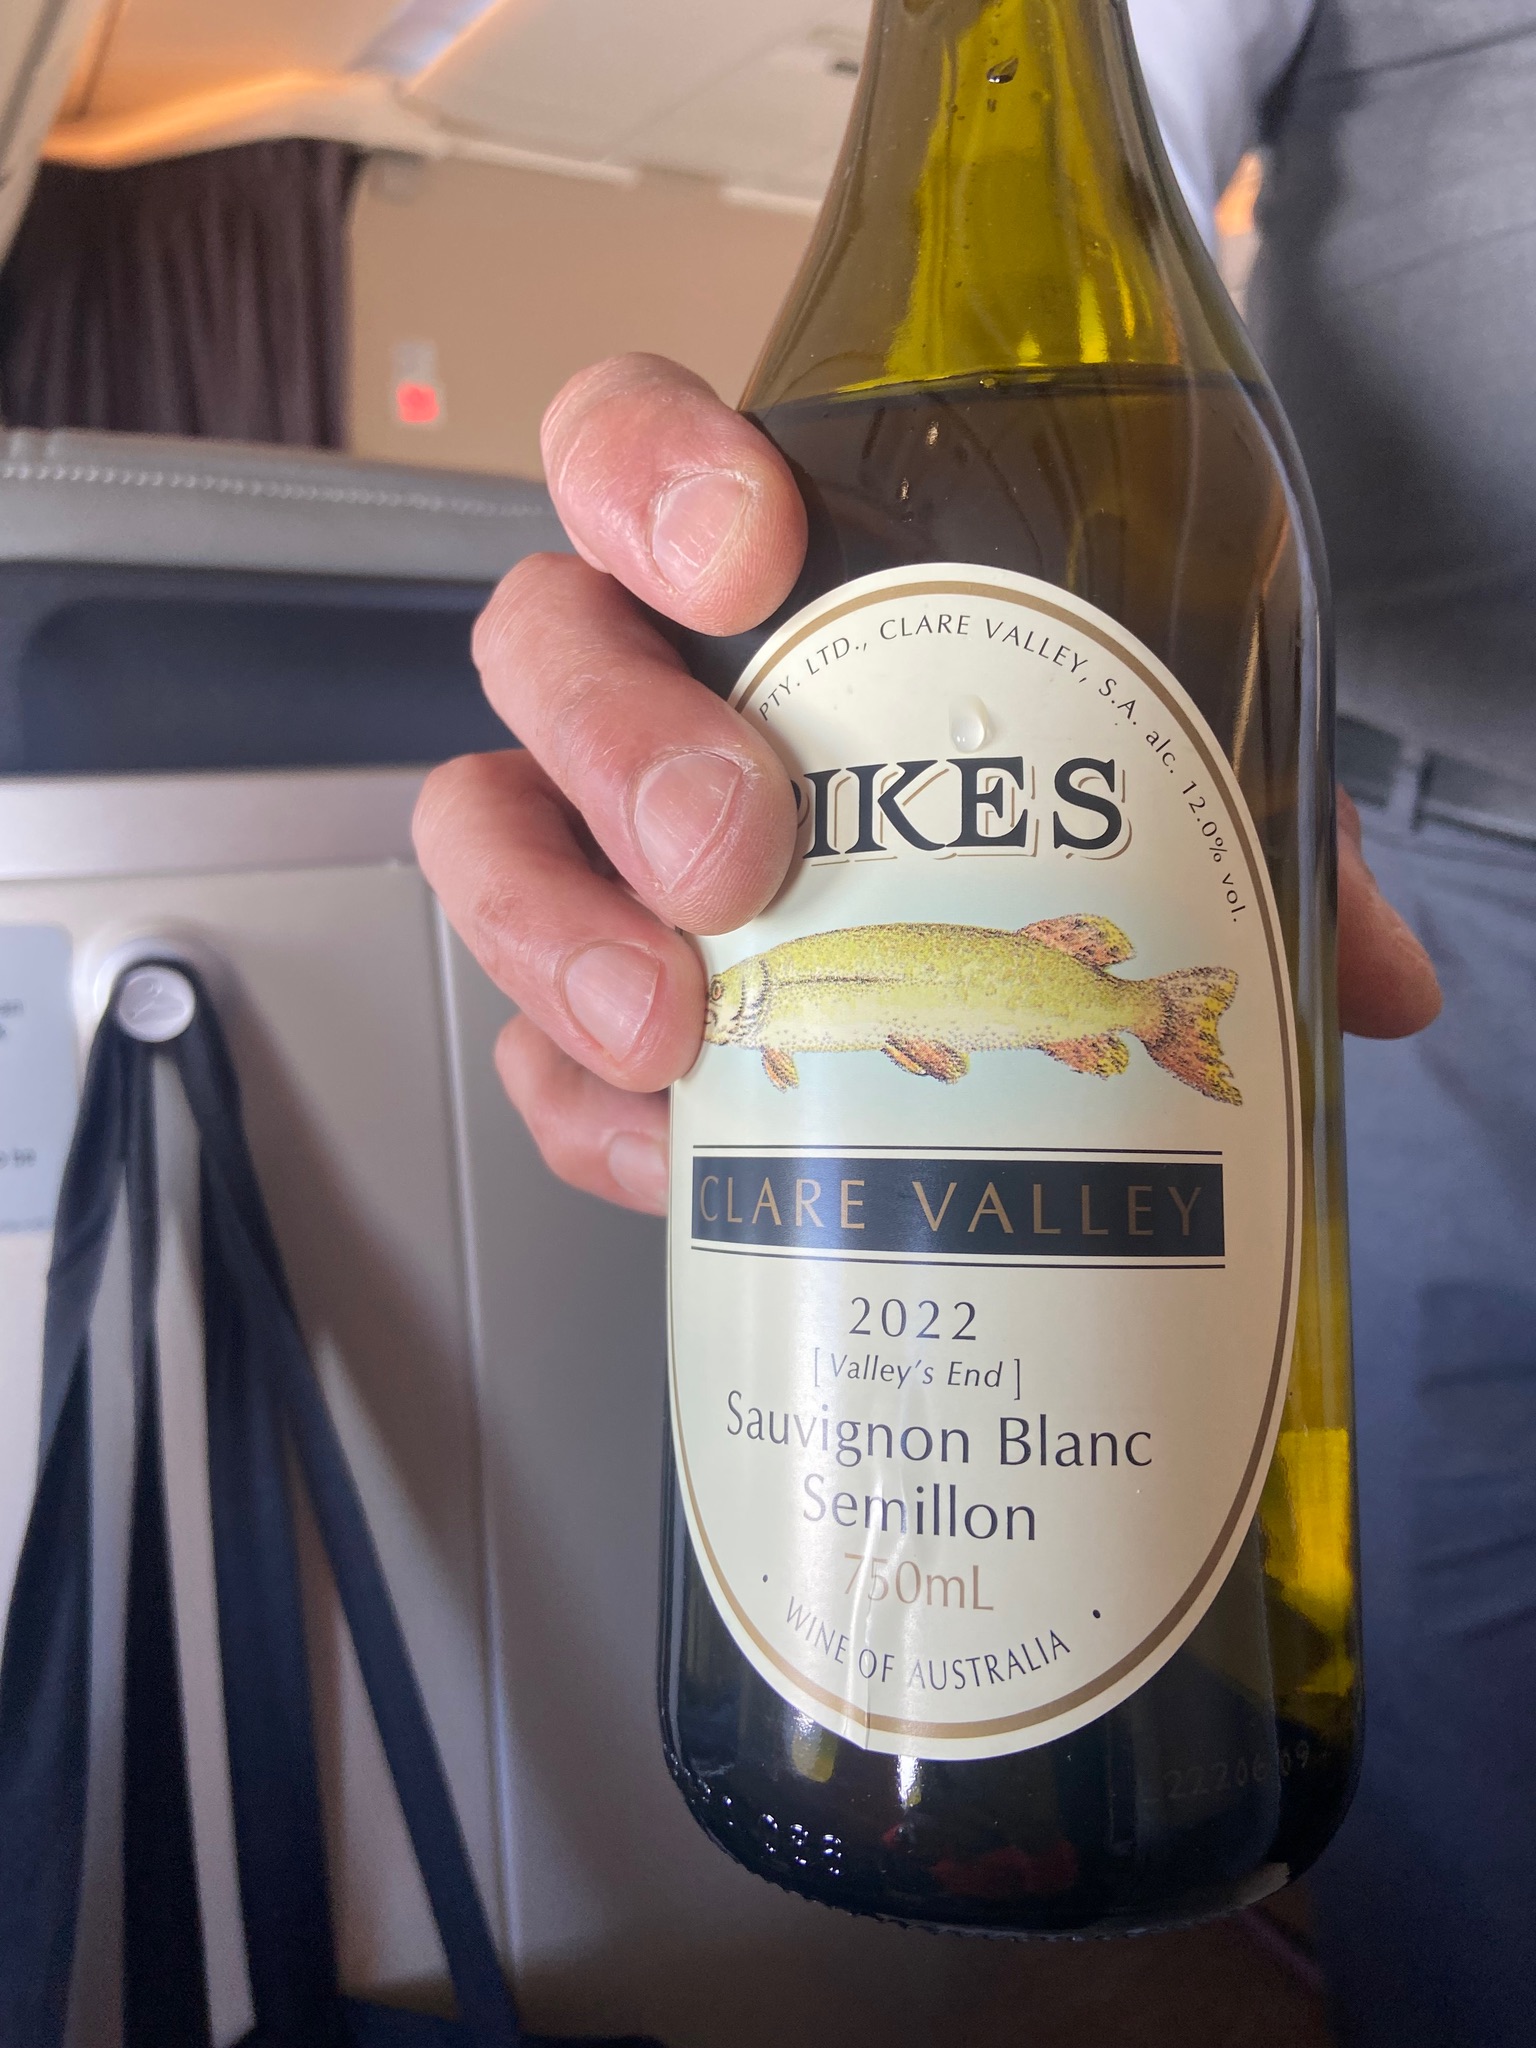 A photo of Malaysia Airlines business class wine